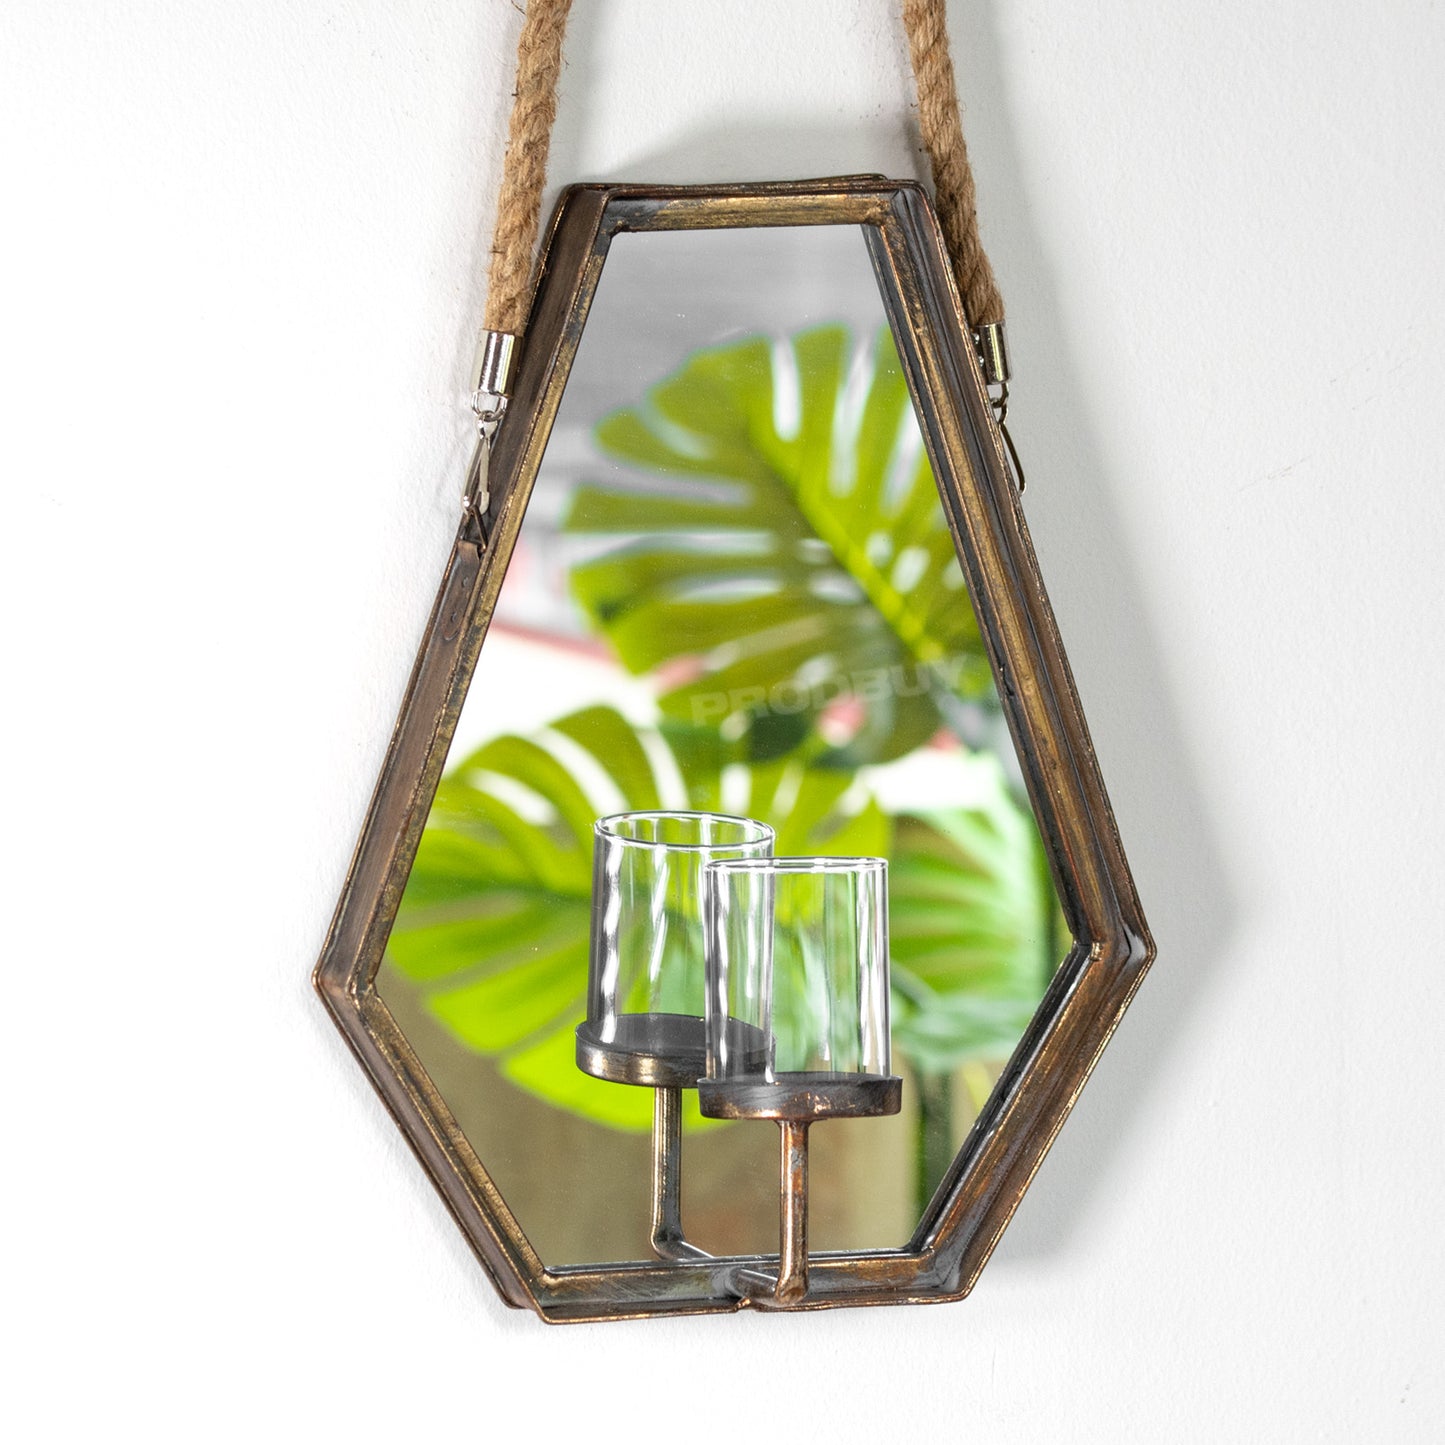 Metal Wall Mounted Mirror With Candle Holder & Hanging Rope Gothic Industrial